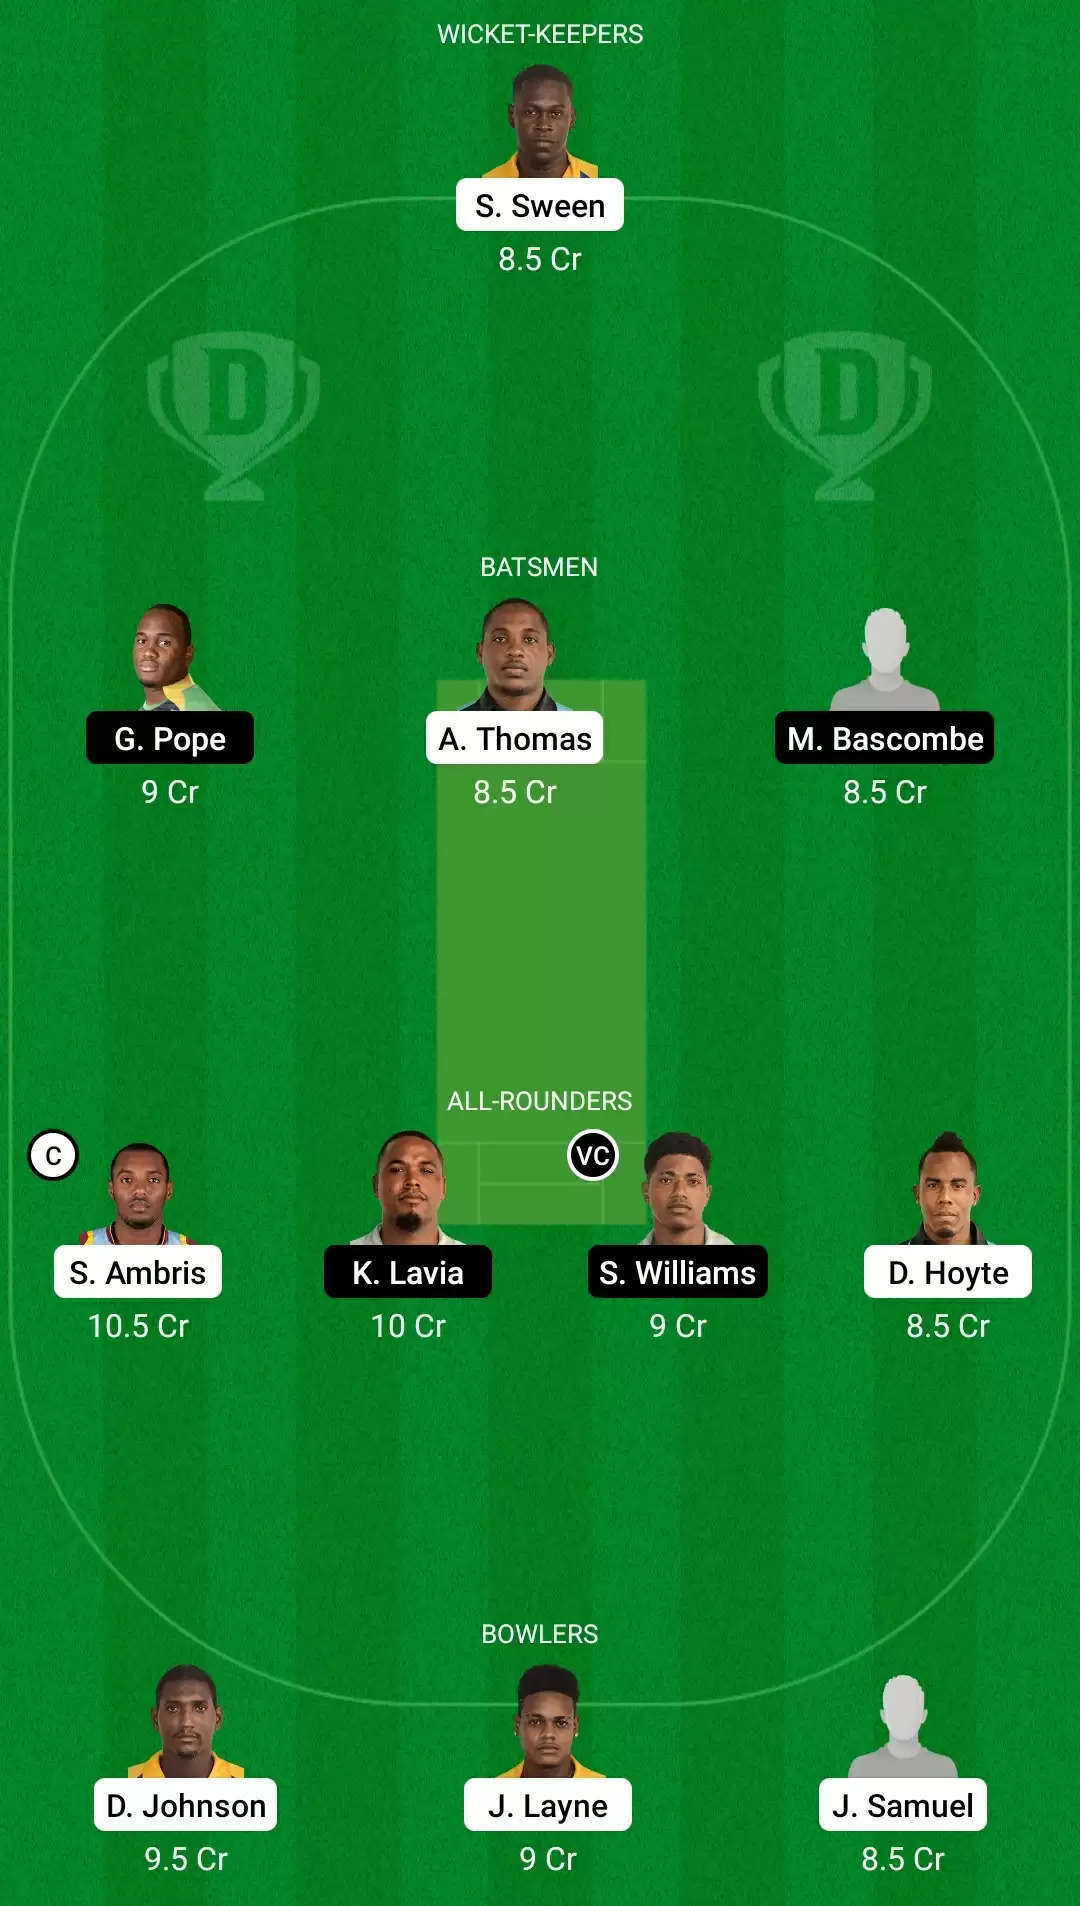 Vincy Premier League 2021, Match 9: SPB vs FCS Dream11 Prediction, Fantasy Cricket Tips, Team, Playing 11, Pitch Report, Weather Conditions and Injury Update